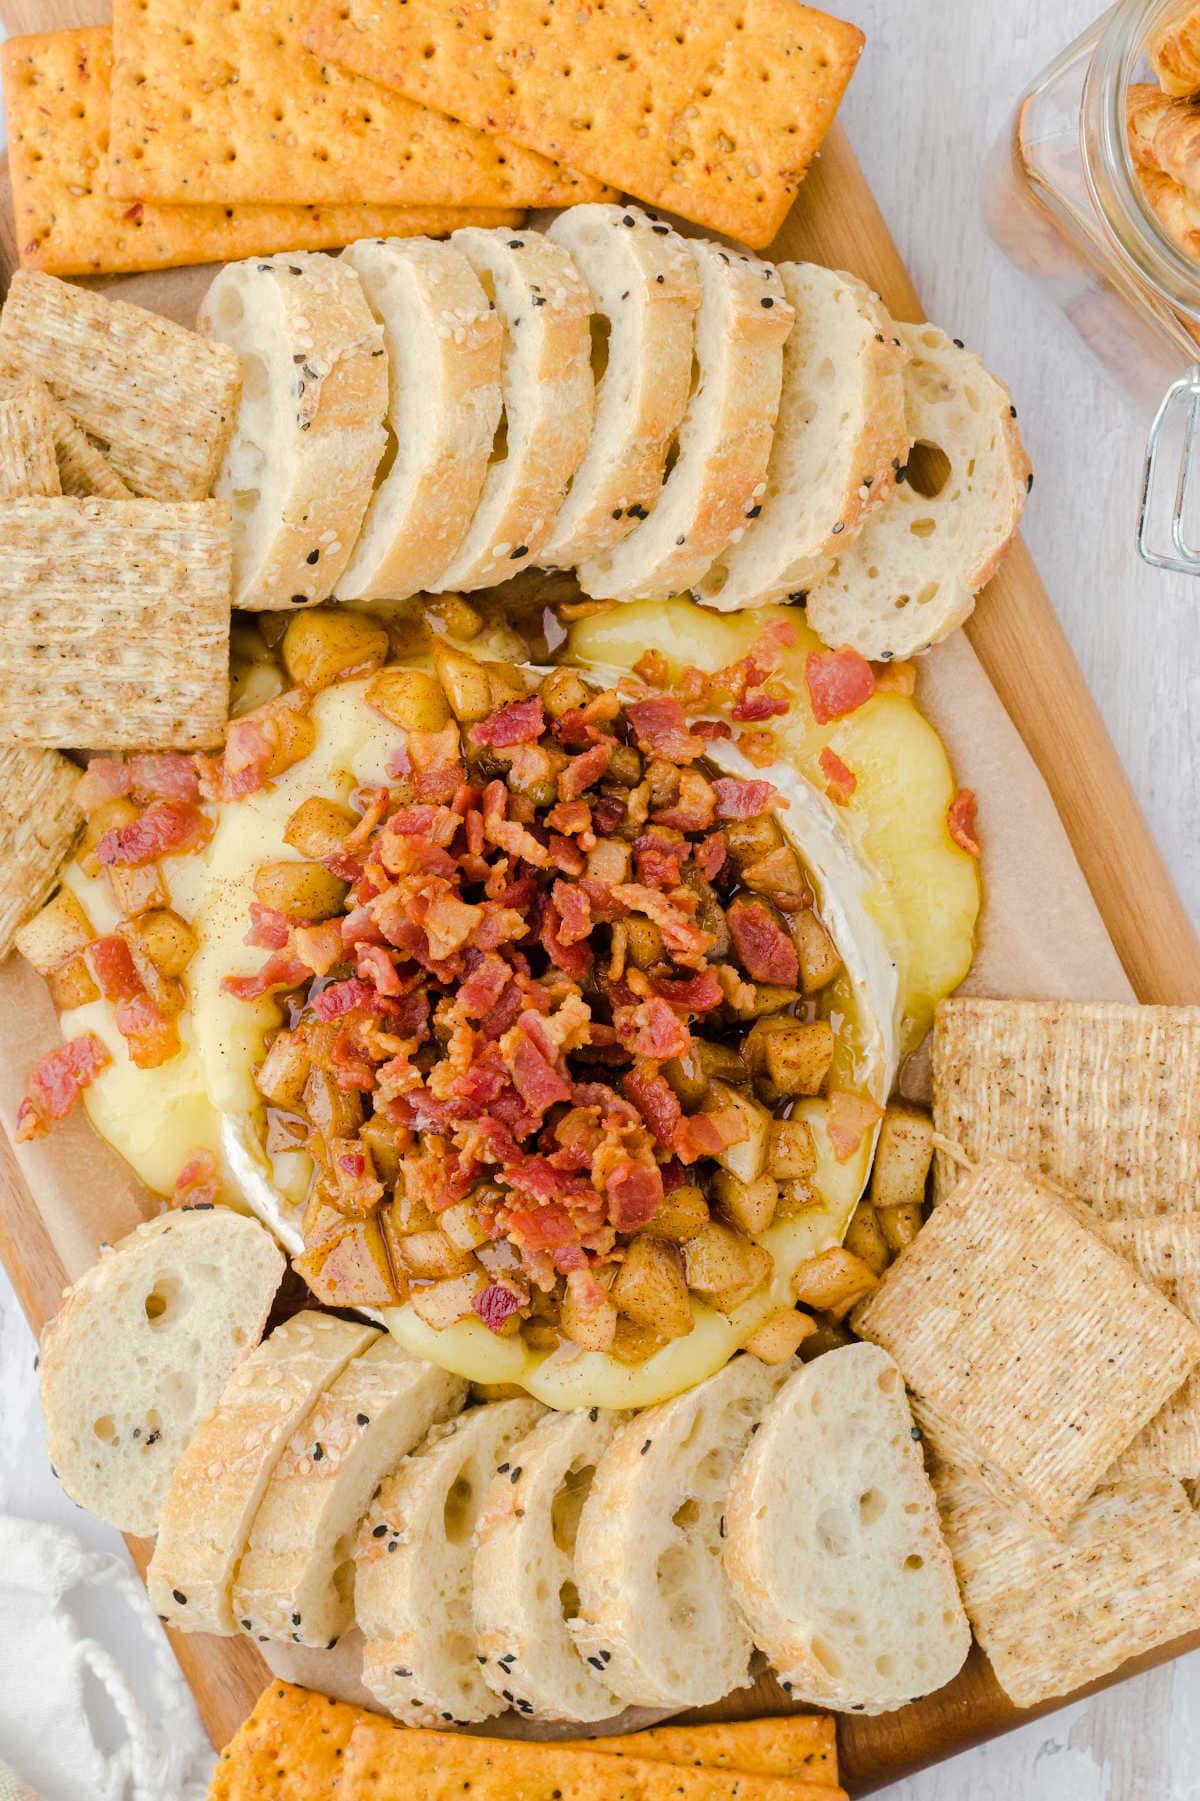 Overhead view of baked brie on a board surrounded by crackers.